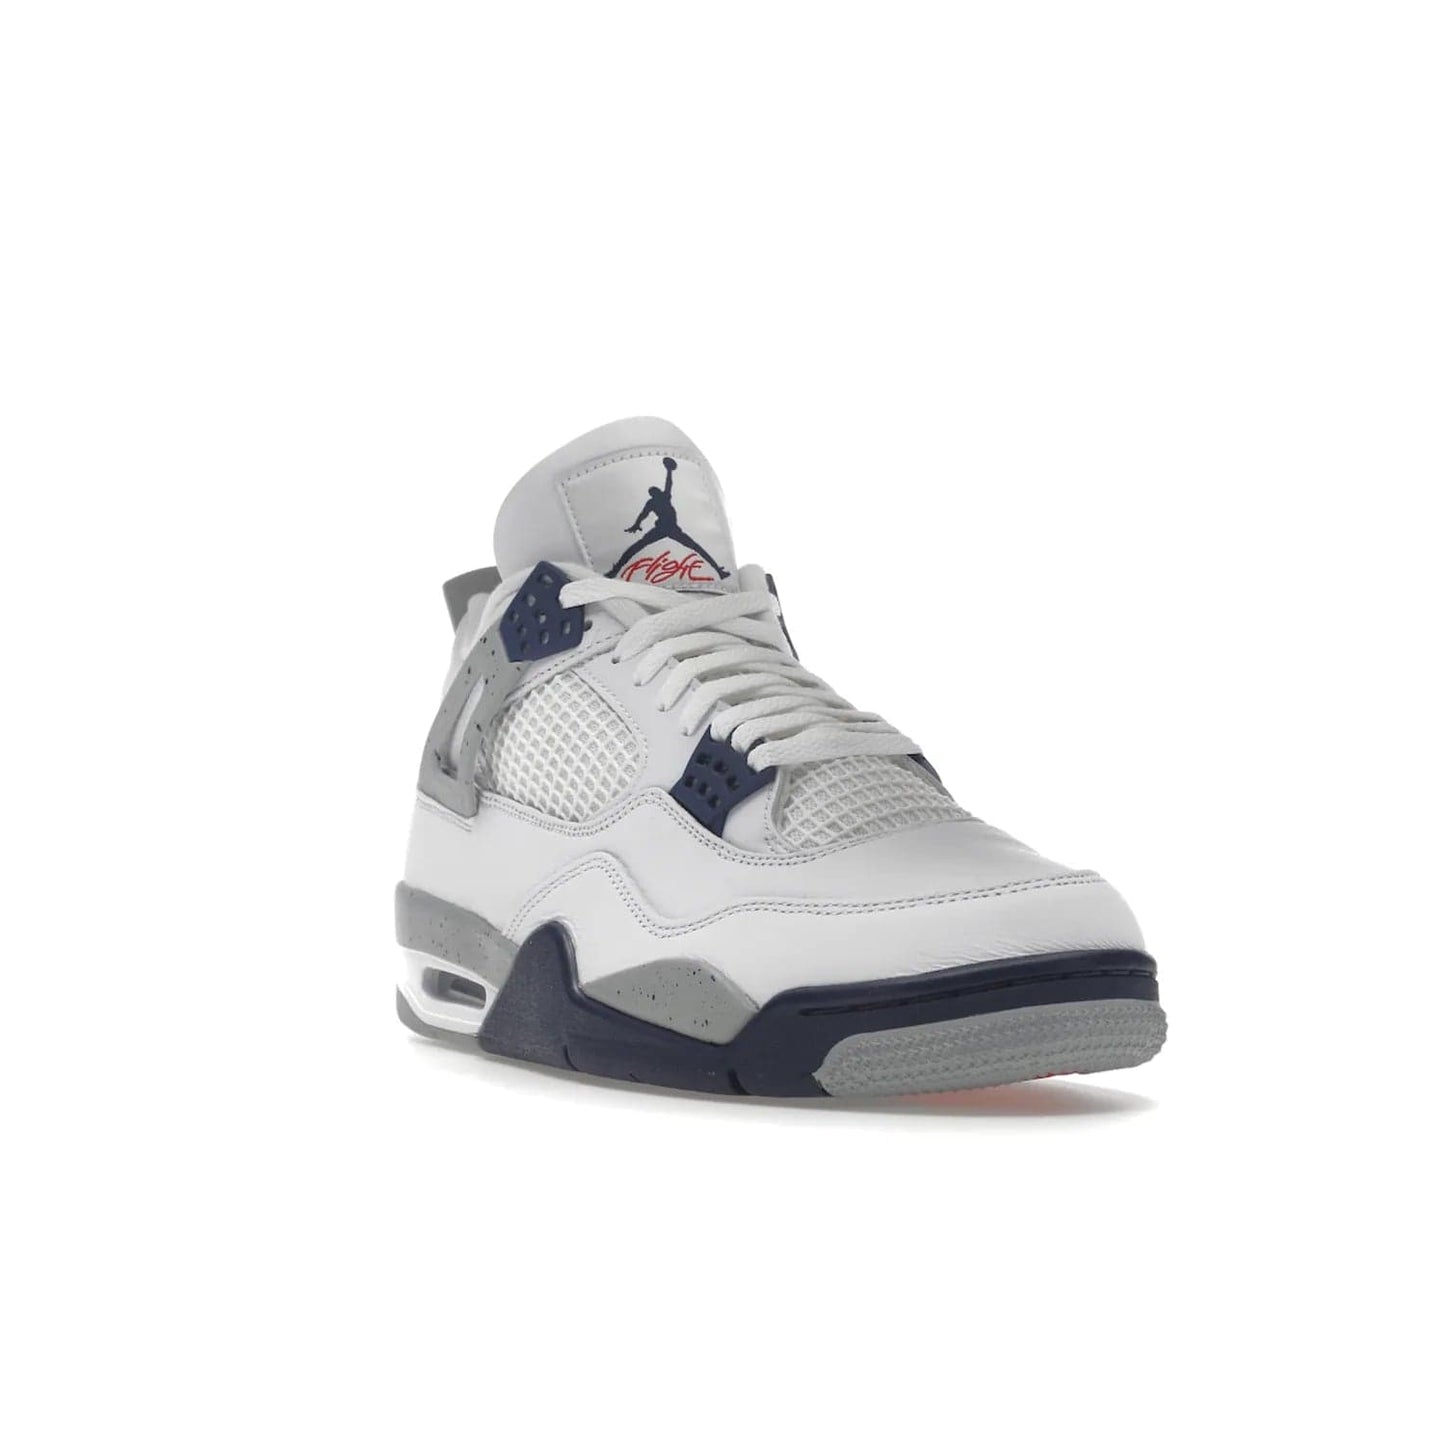 Jordan 4 Retro Midnight Navy - Image 7 - Only at www.BallersClubKickz.com - Shop the Air Jordan Retro 4 White Midnight Navy. Stand out with a classic white leather upper, black support wings, midnight navy eyelets, and Crimson Jumpman tongue tag. Unbeatable comfort with two-tone polyurethane midsole with encapsulated Air technology. Get yours before October 29th, 2022.